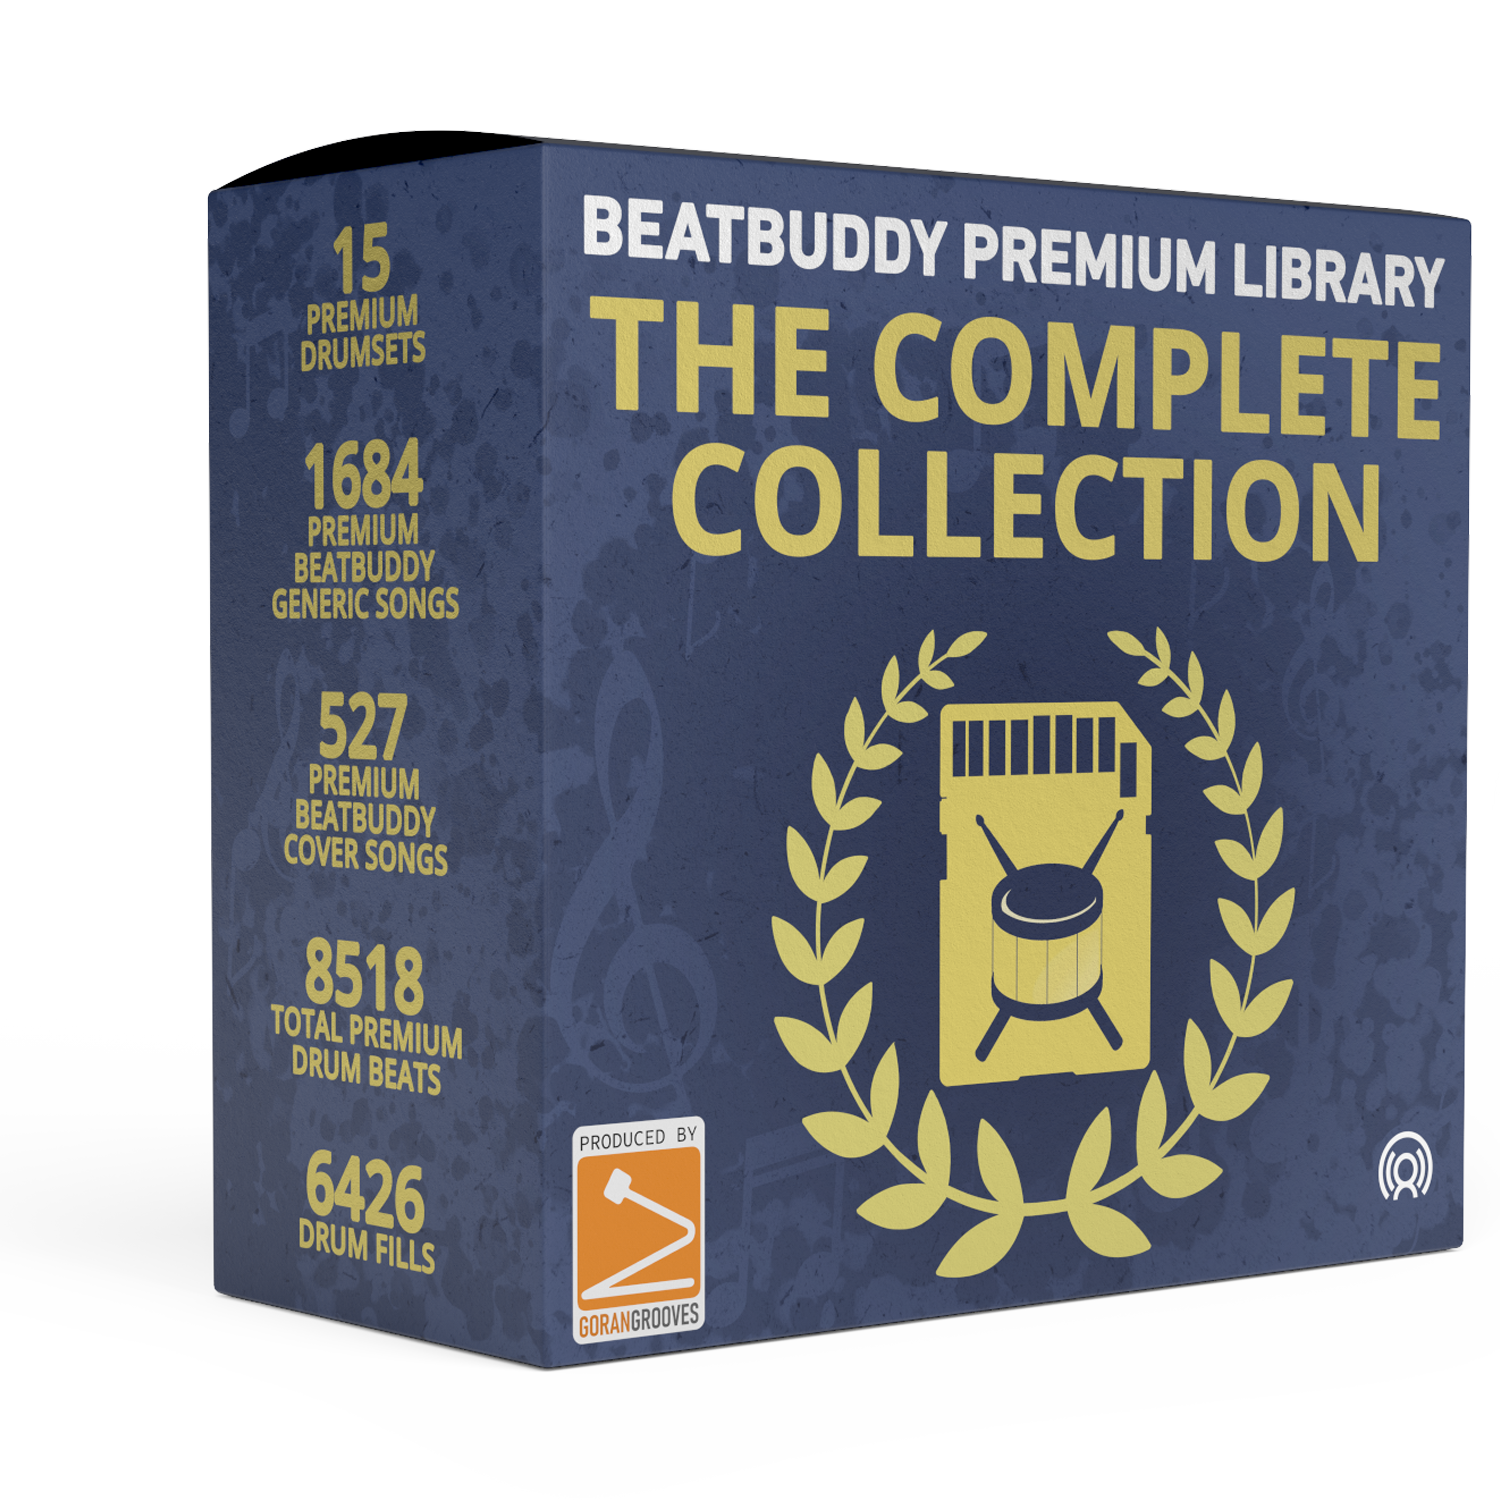 Premium Library SD Card: The Complete Collection